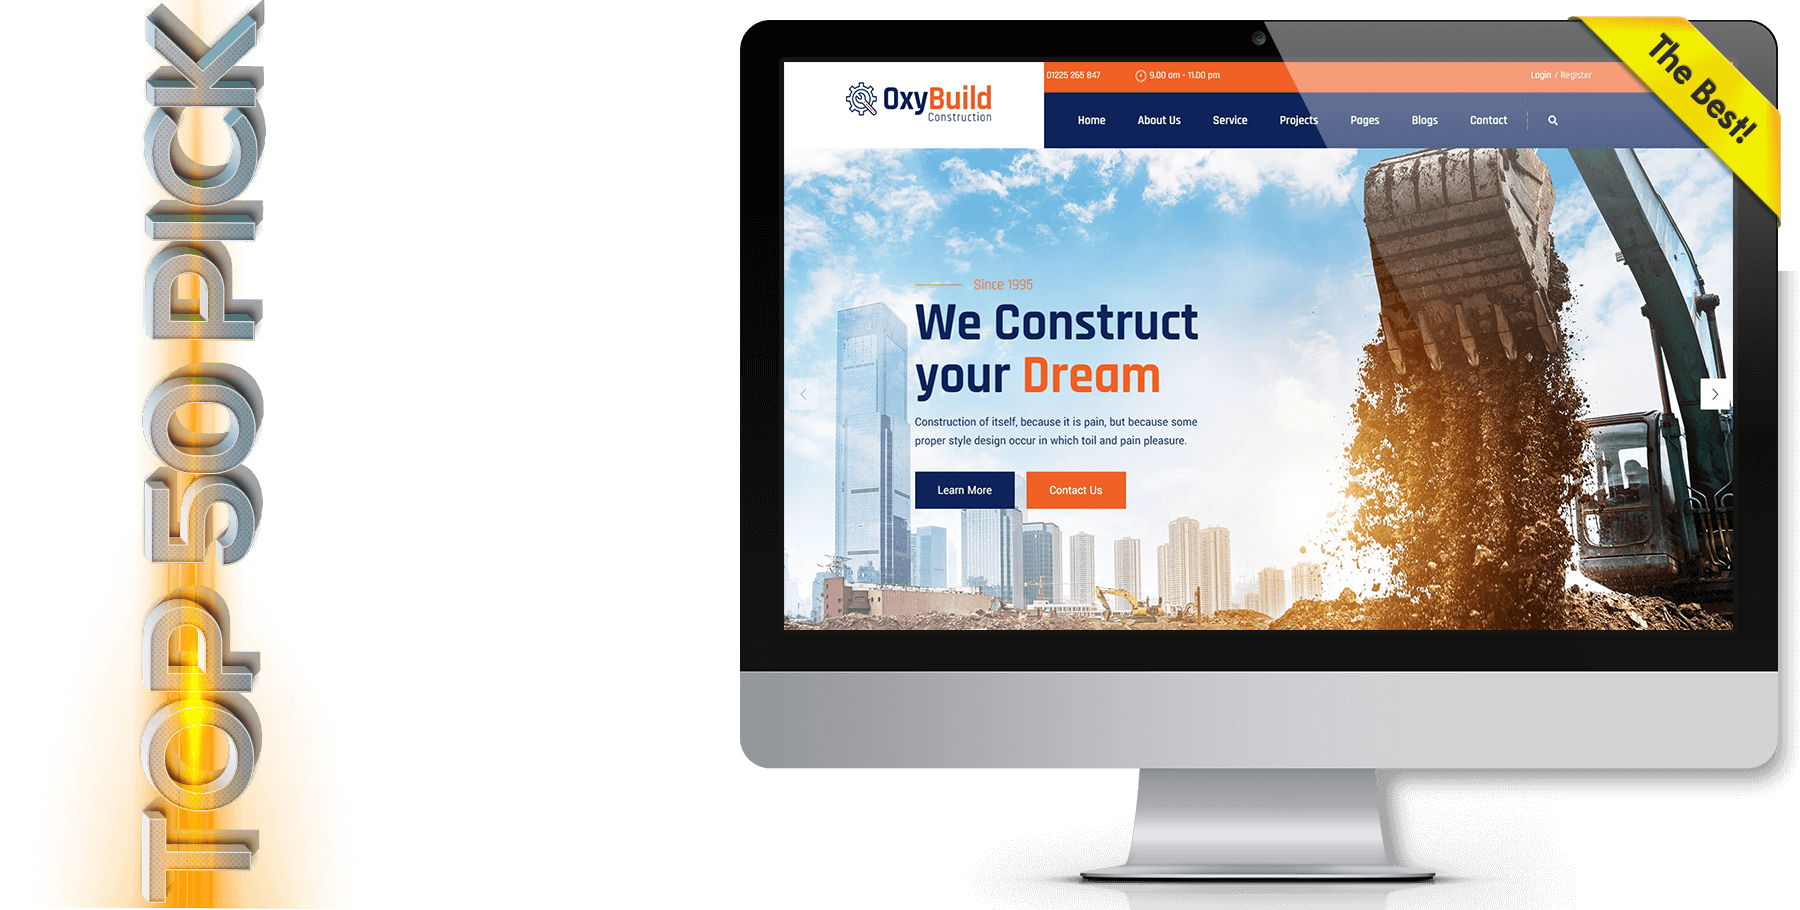 A website design in construction named Oxy Build